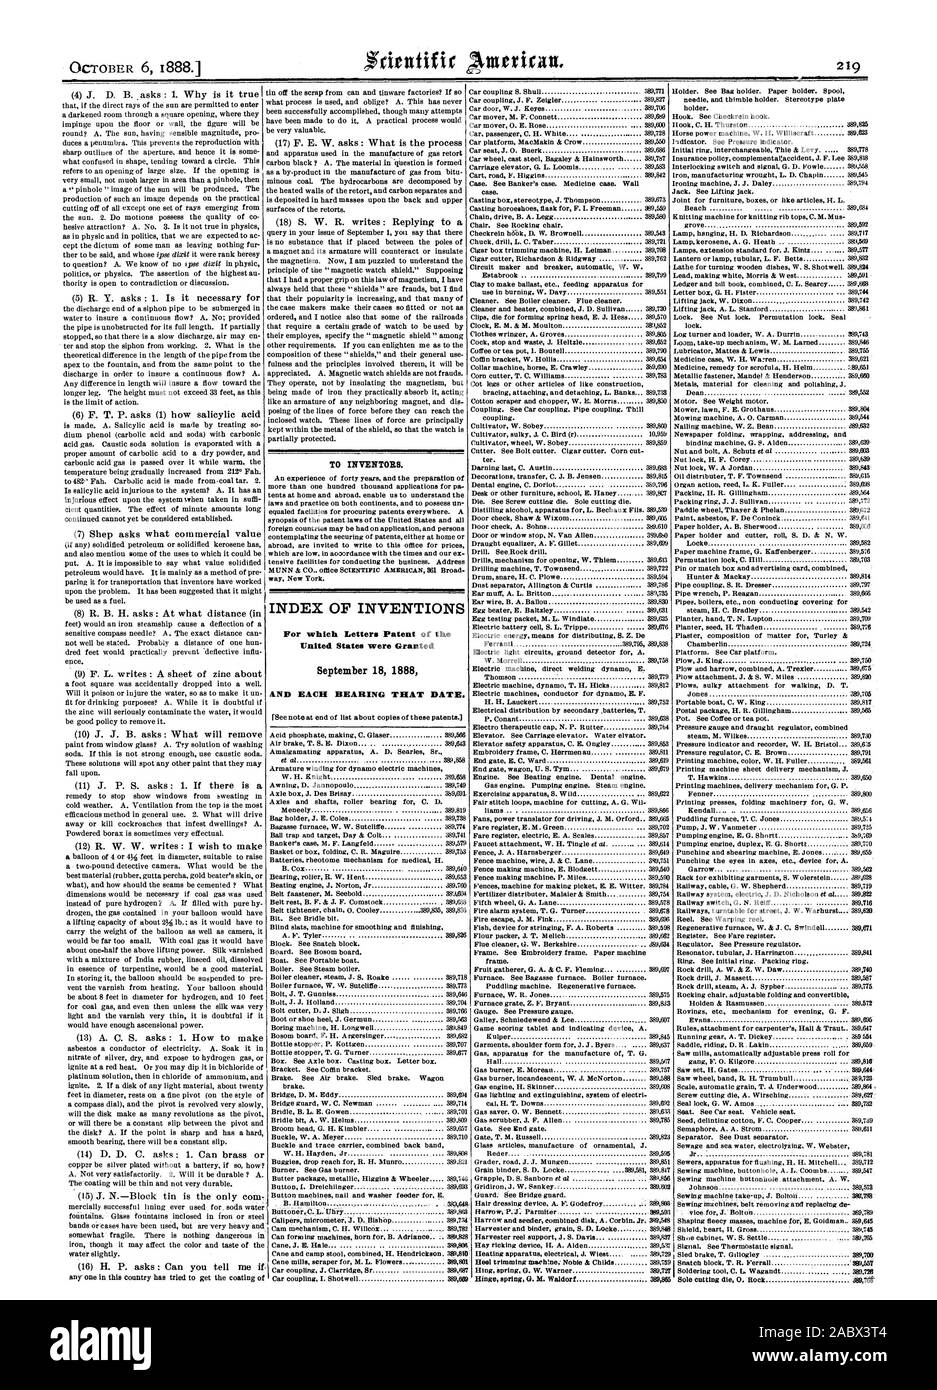 TO INVENTORS. INDEX OF INVENTIONS For which Letters Patent of the United States were Granted September 18 1888 AND EACH BEARING THAT DATE., scientific american, 1888-10-06 Stock Photo